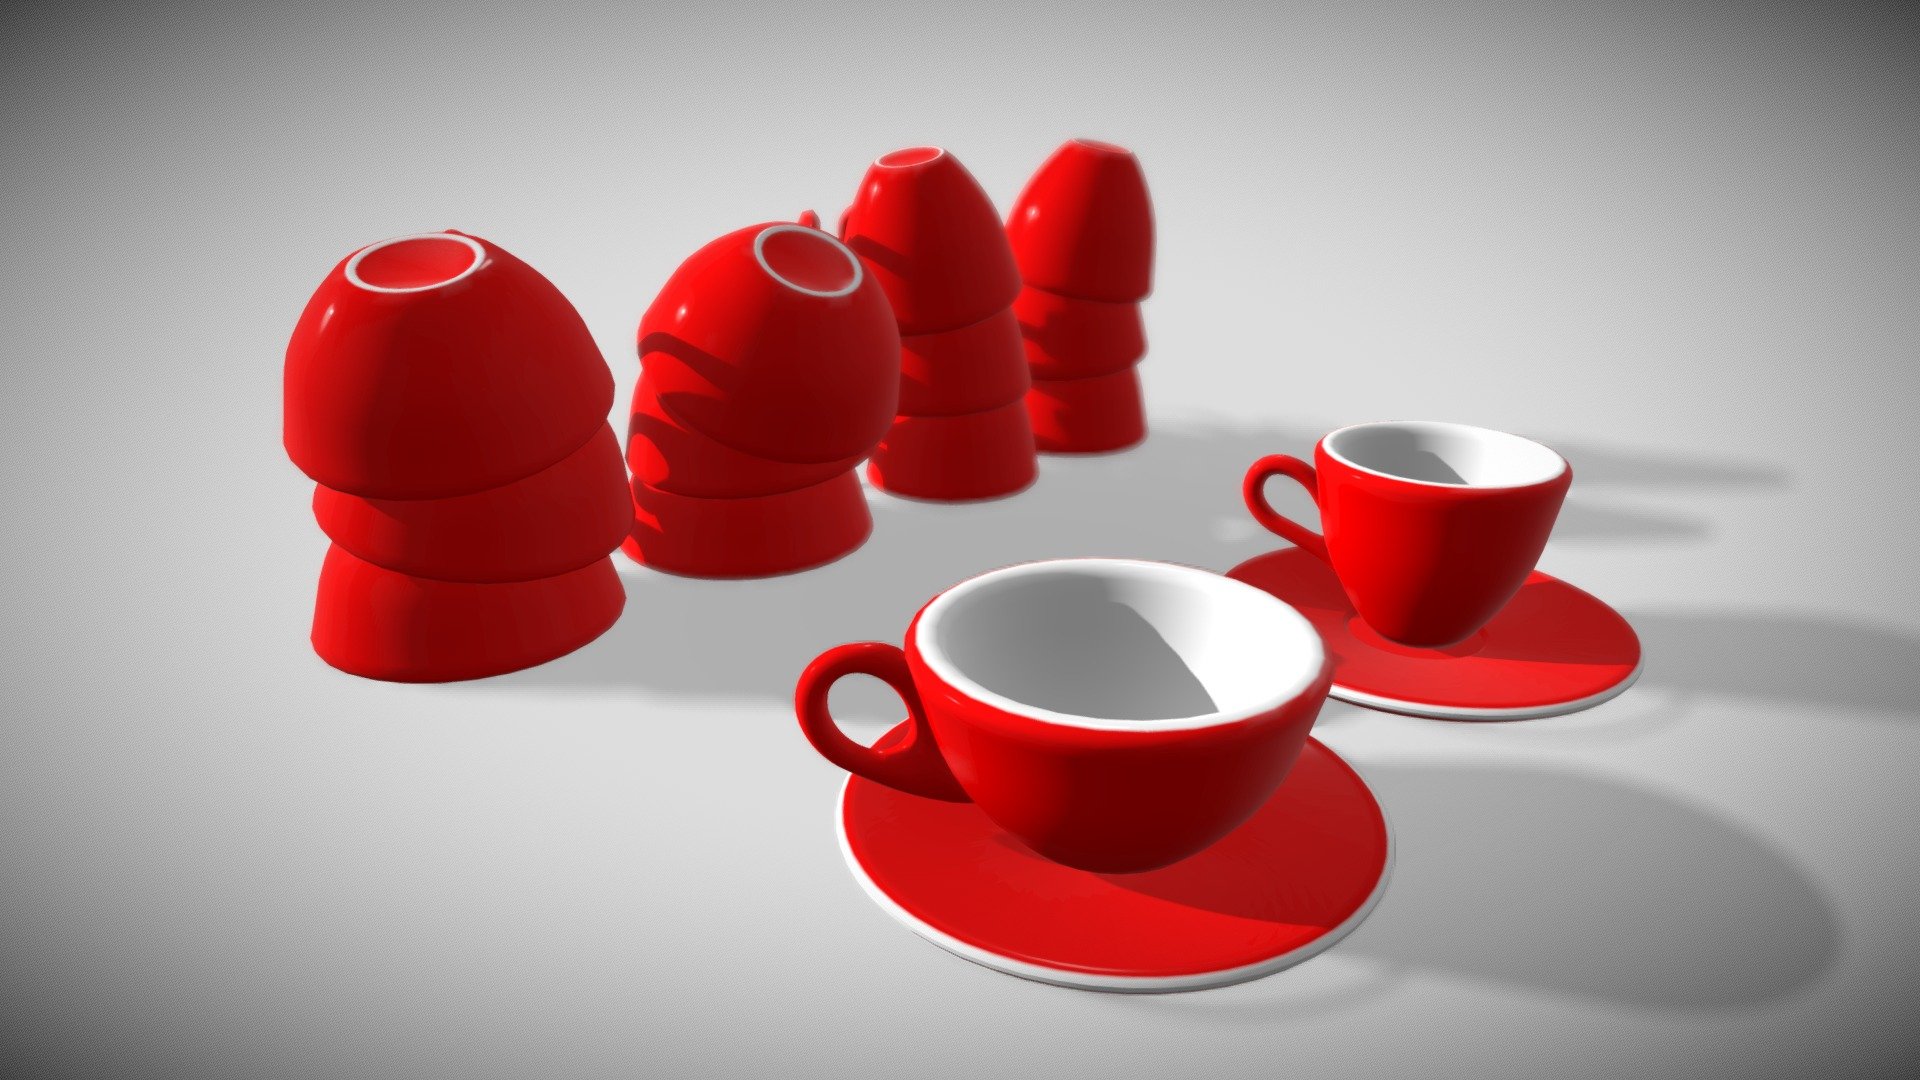 3D models of red cappuccino and espresso cups and saucer for cafe. Includes stacked cups for a commercial coffee machine or cafe scene 3d model